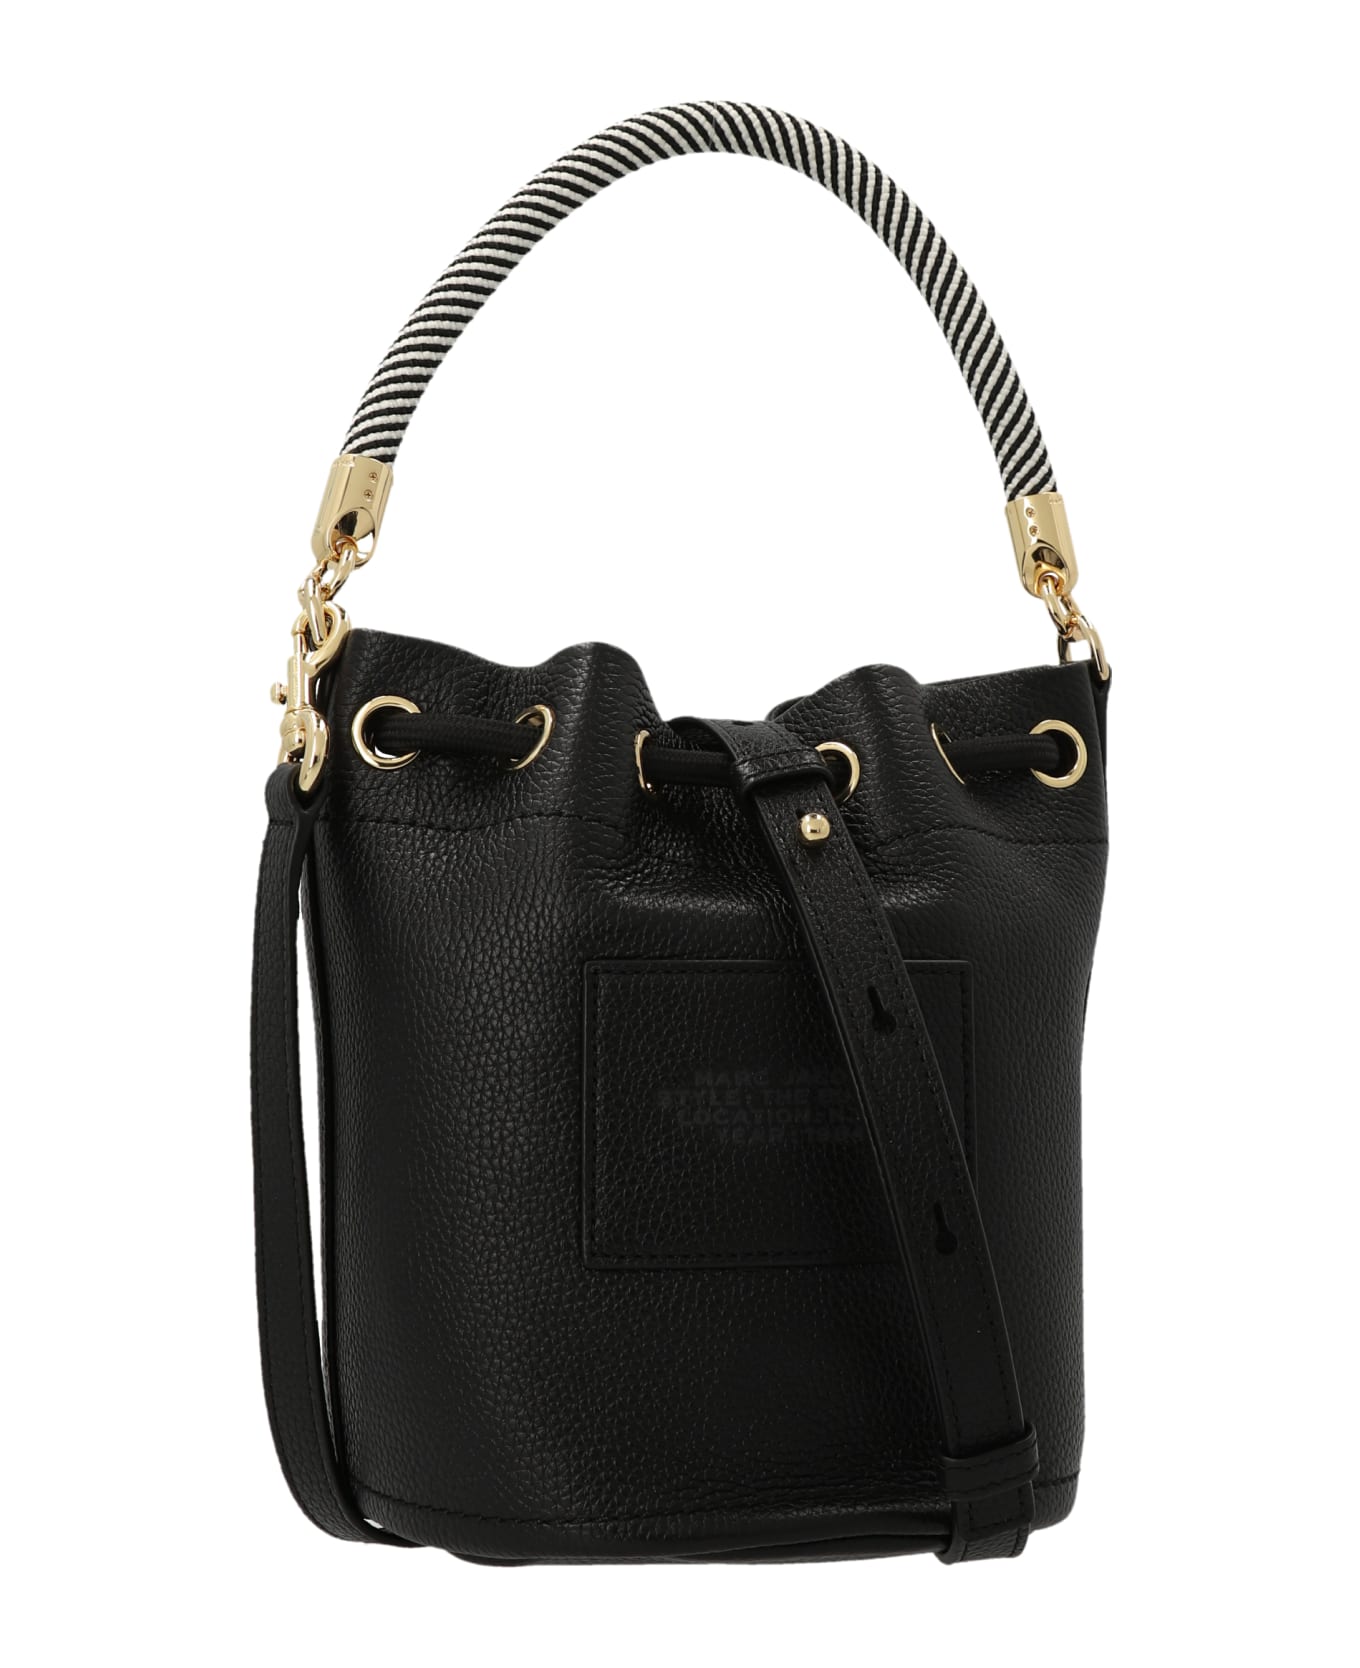 Marc Jacobs The Leather Bucket Bag - Black